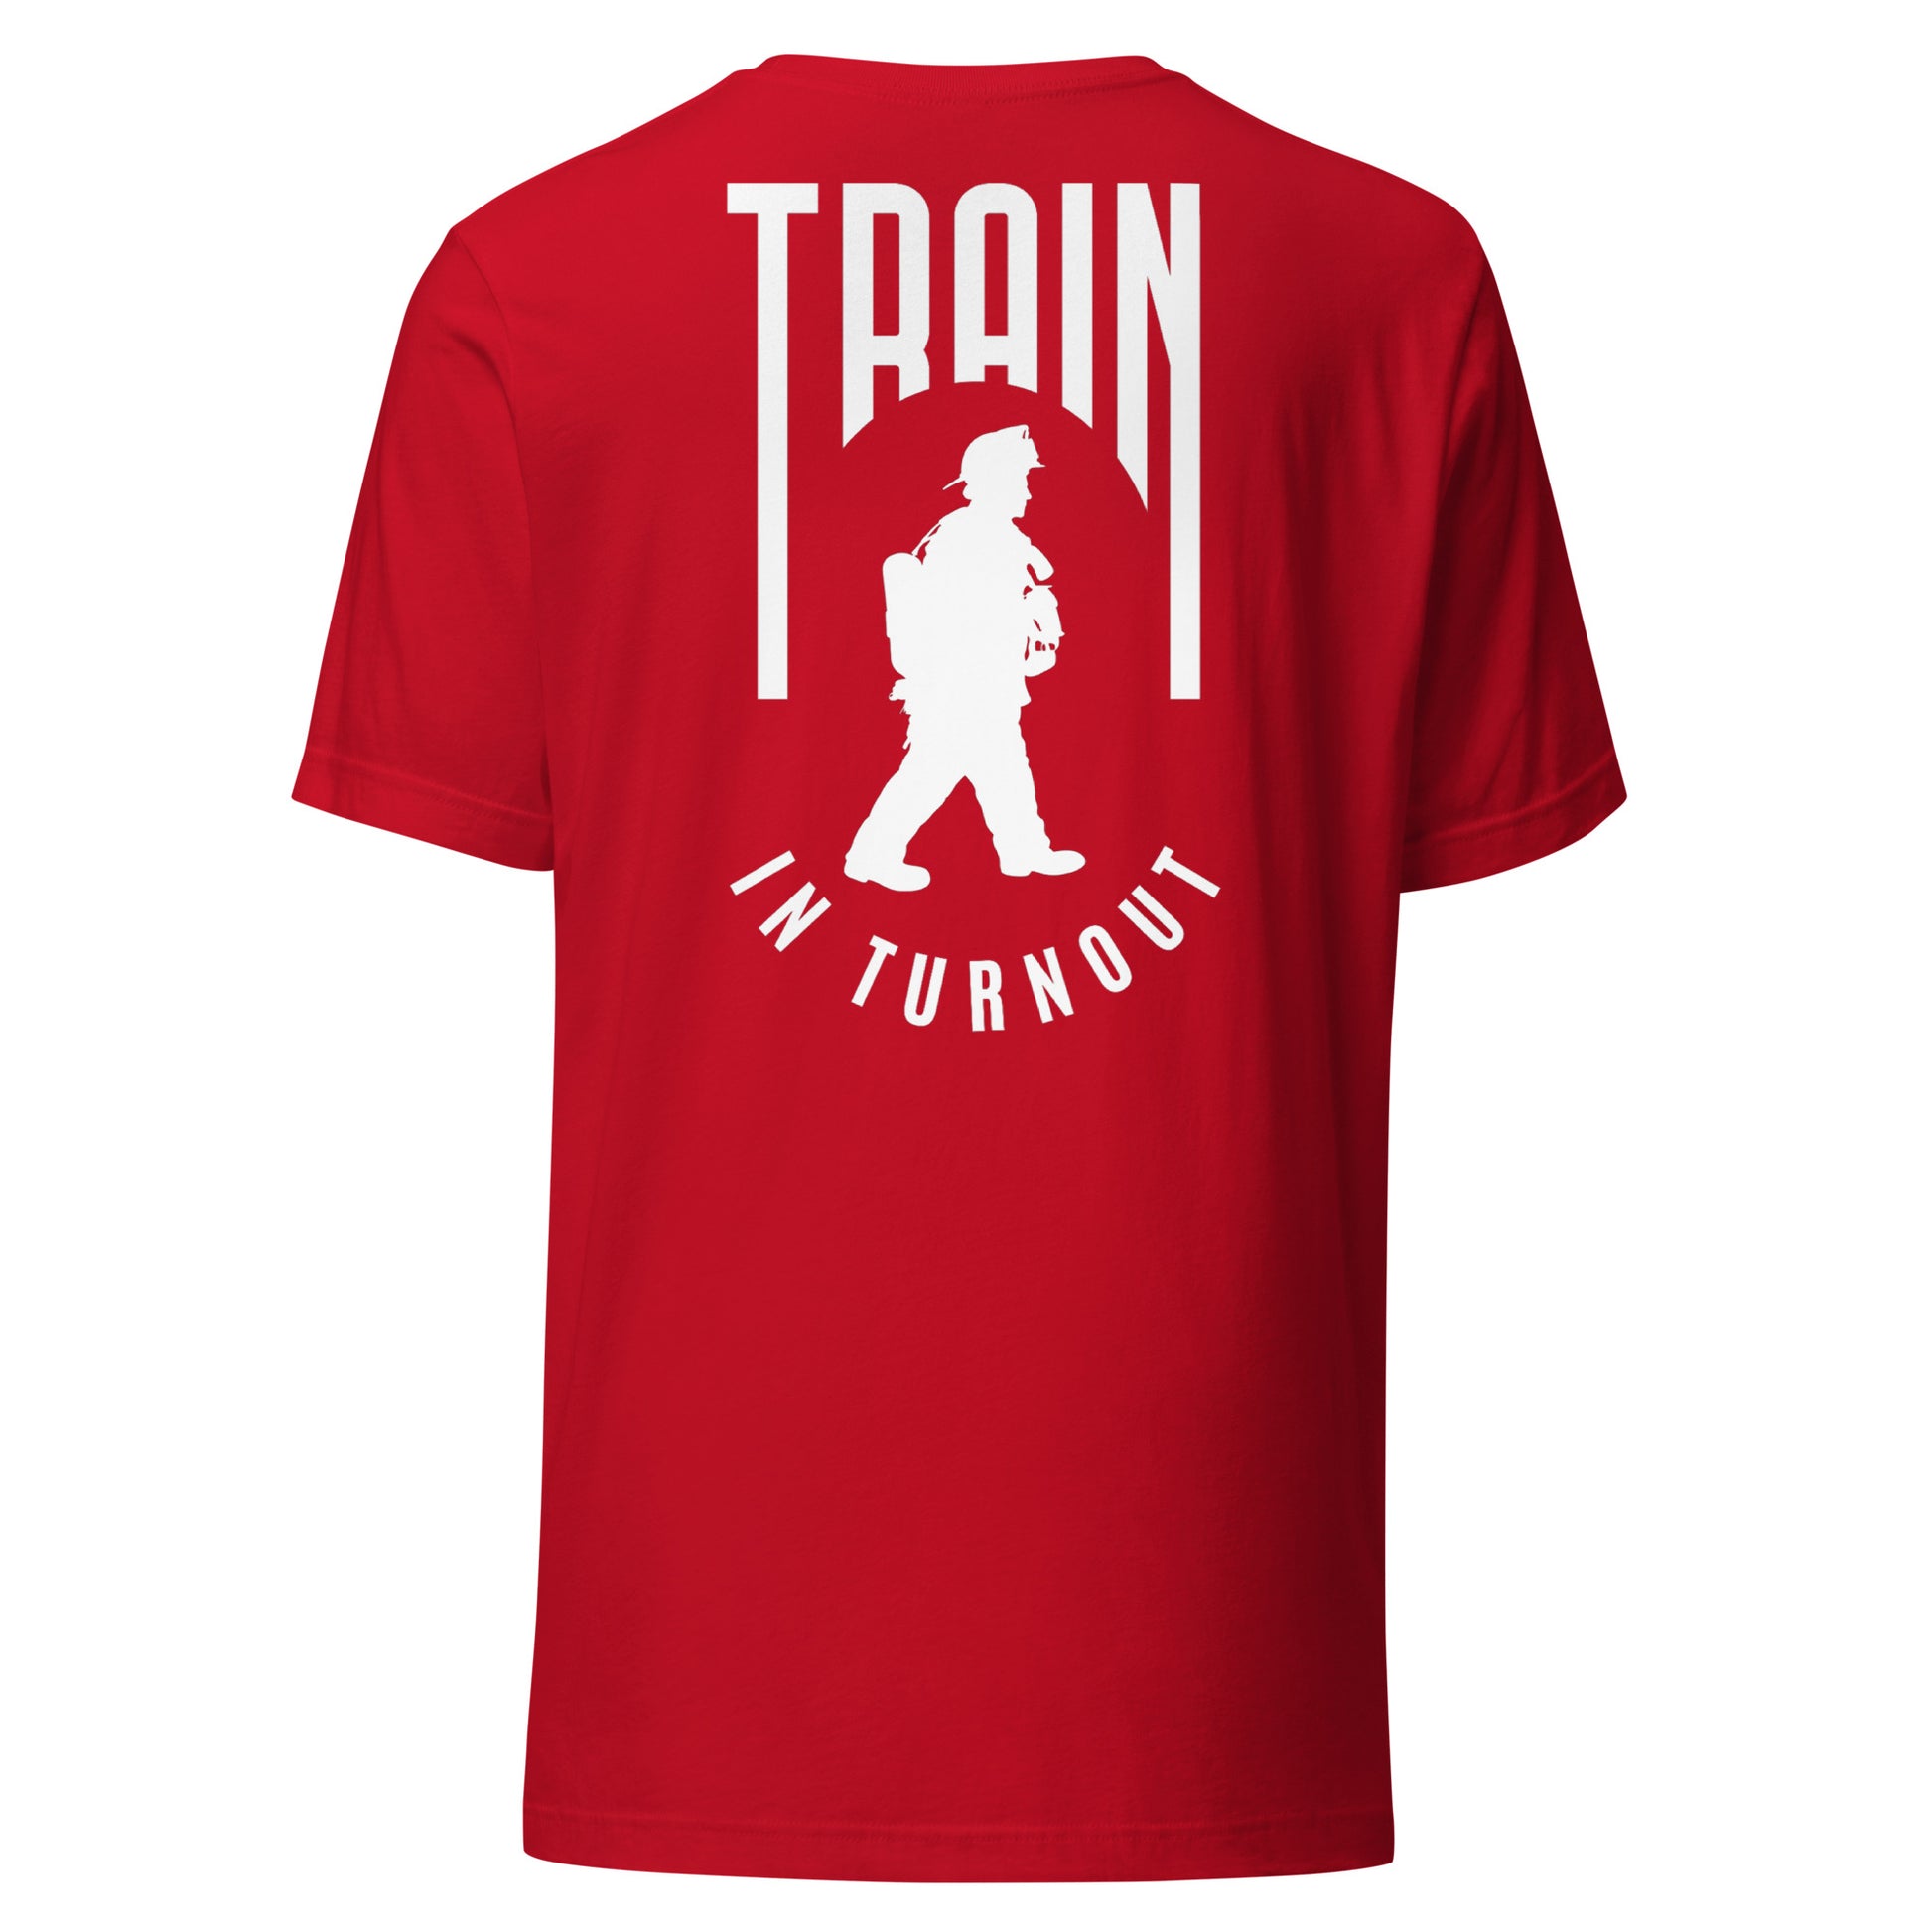 Train in Turnout Graphic Firefighter shirt, red and white.  